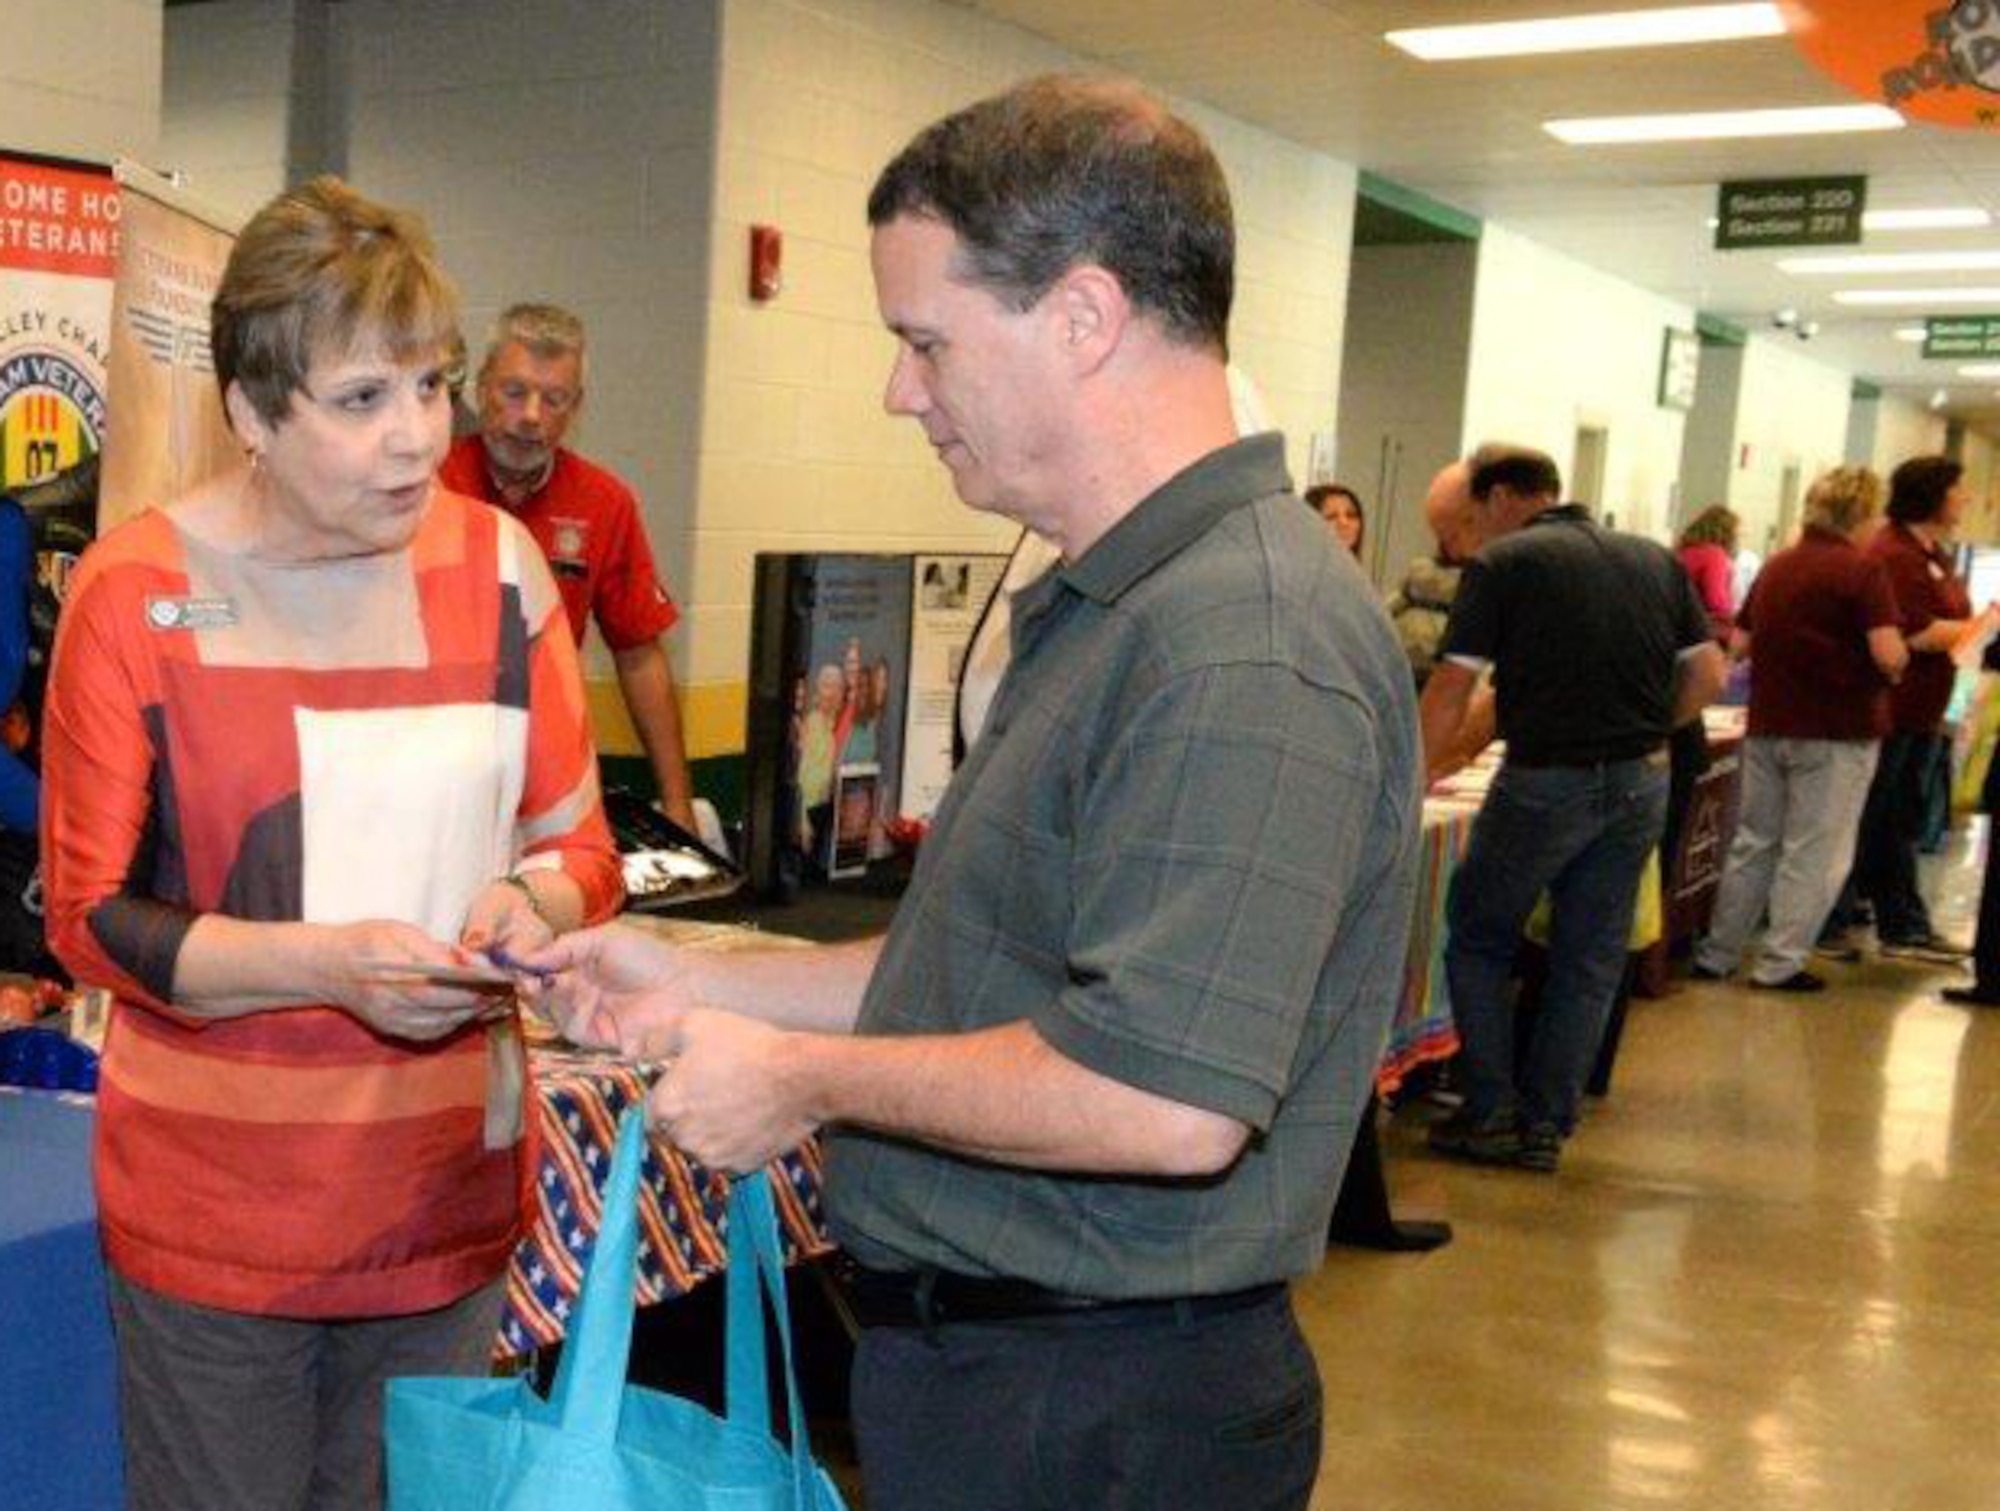 People who attend the Miami Valley Combined Federal Campaign Kickoff and Charity Fair Oct. 11 from 11 a.m. to 1 p.m. at Wright State University’s Nutter Center will have the opportunity to learn about the work charitable organizations do locally, statewide, regionally, nationally and internationally. (U.S. Air Force file photo)